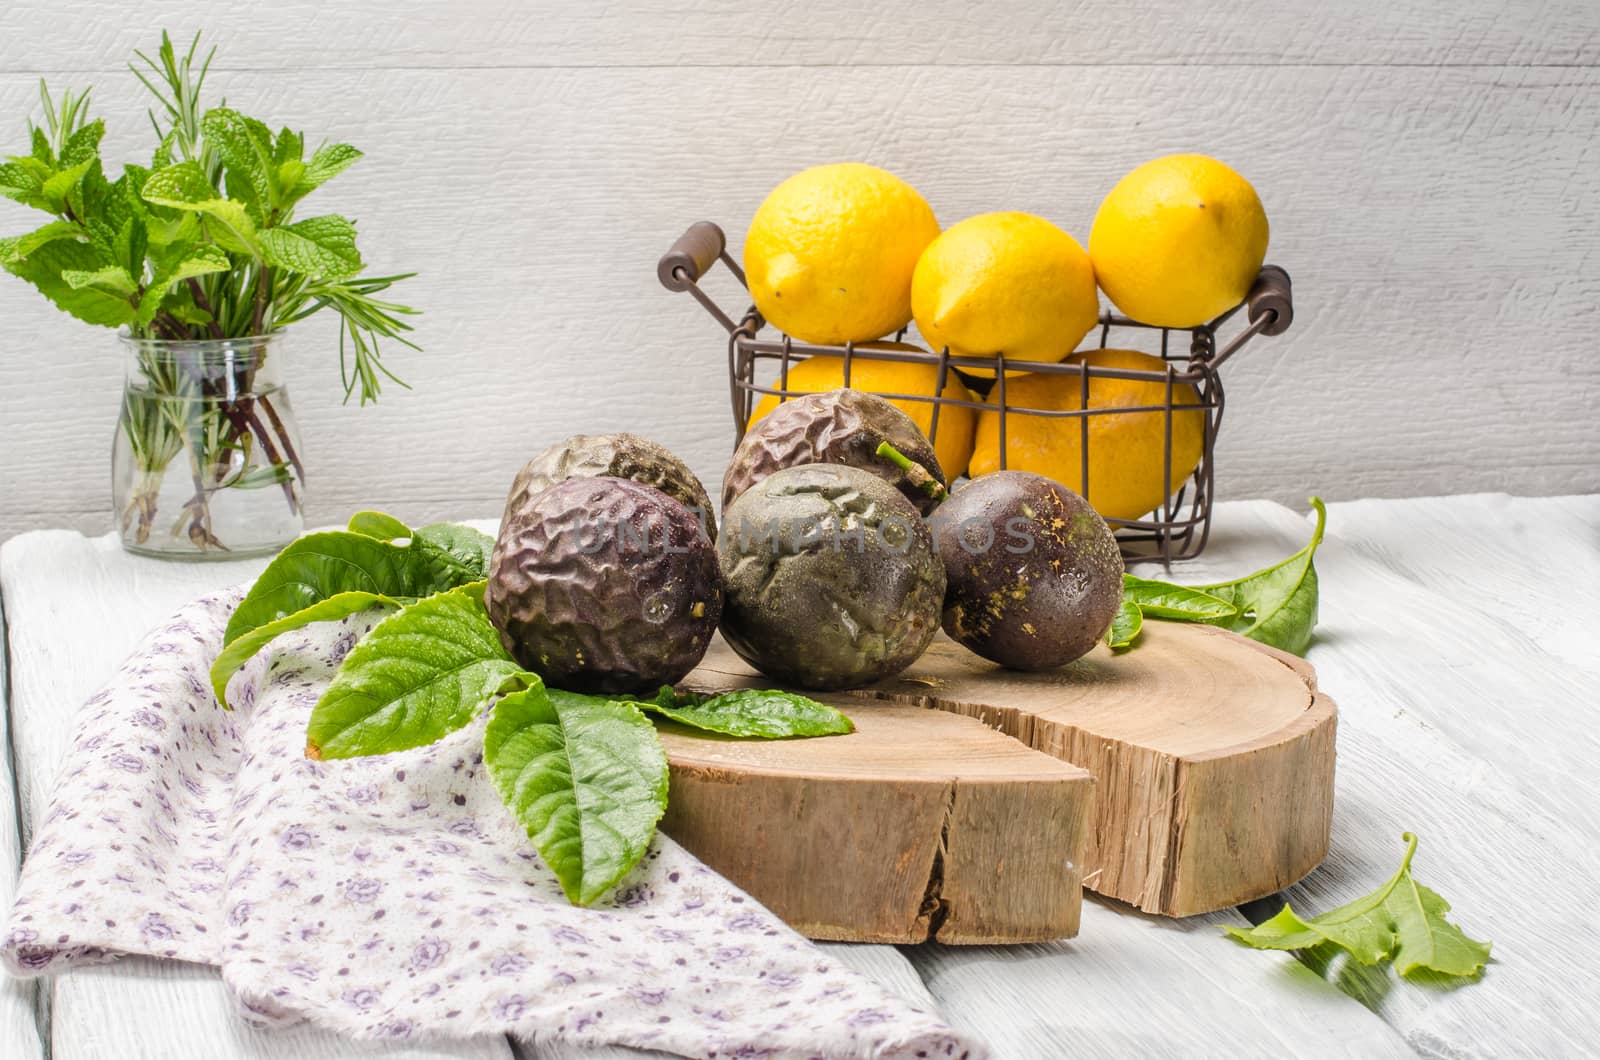 Passion fruits with leaves, lemons and herbs in jar on the vintage wooden table.